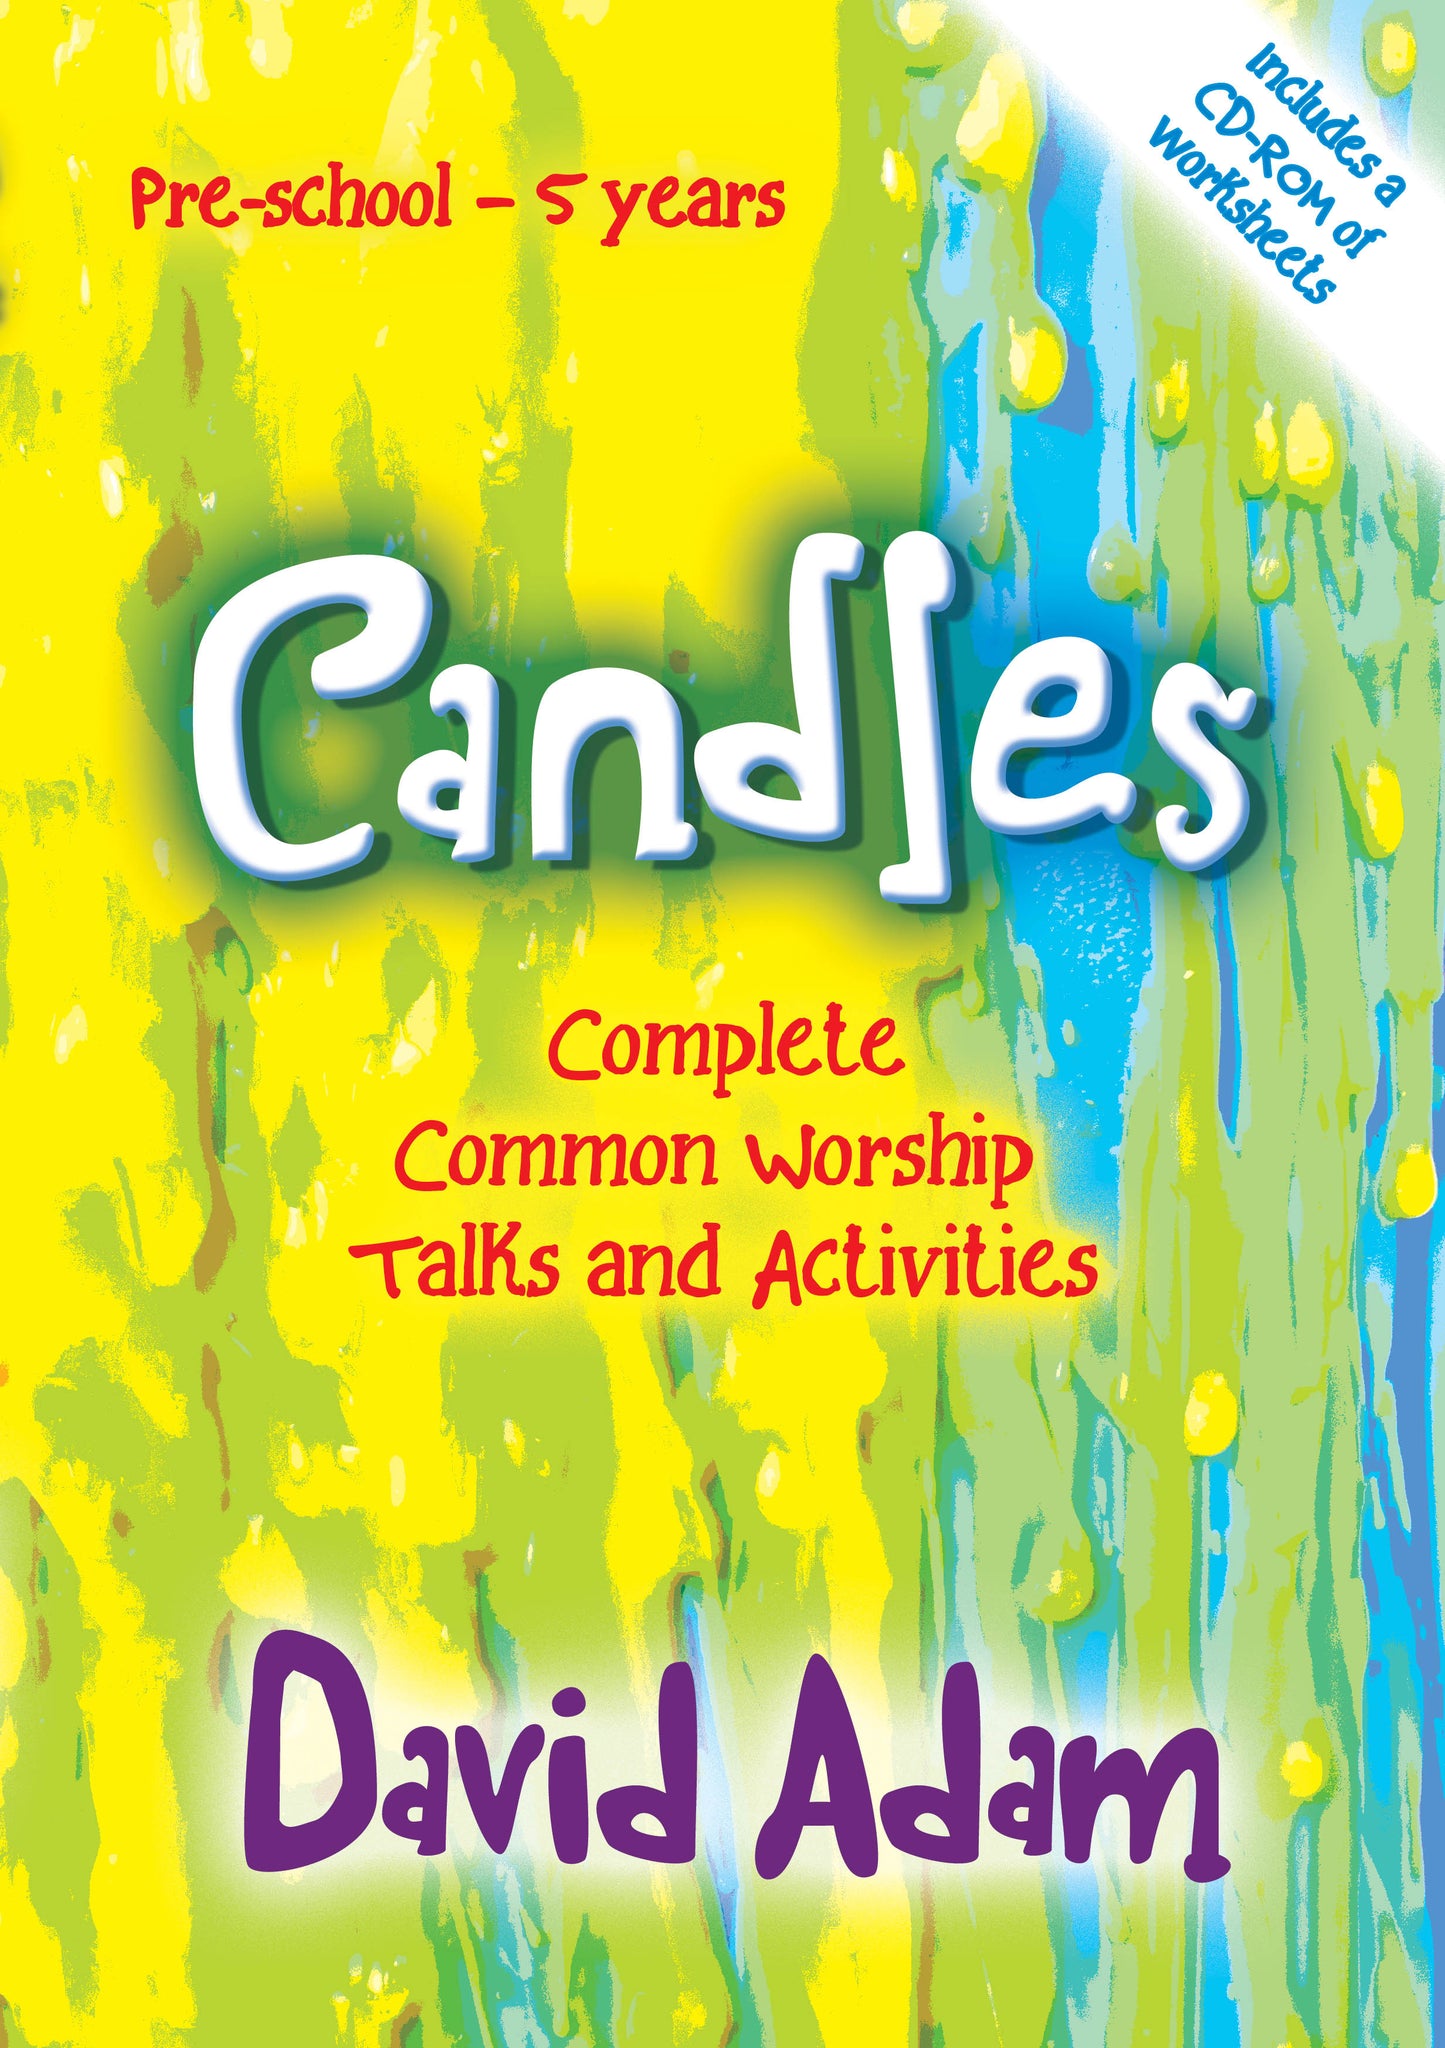 Candles - Complete Common Worship, Talks & Activities (+ Cd)  Preschool - 5 YrsCandles - Complete Common Worship, Talks & Activities (+ Cd)  Preschool - 5 Yrs